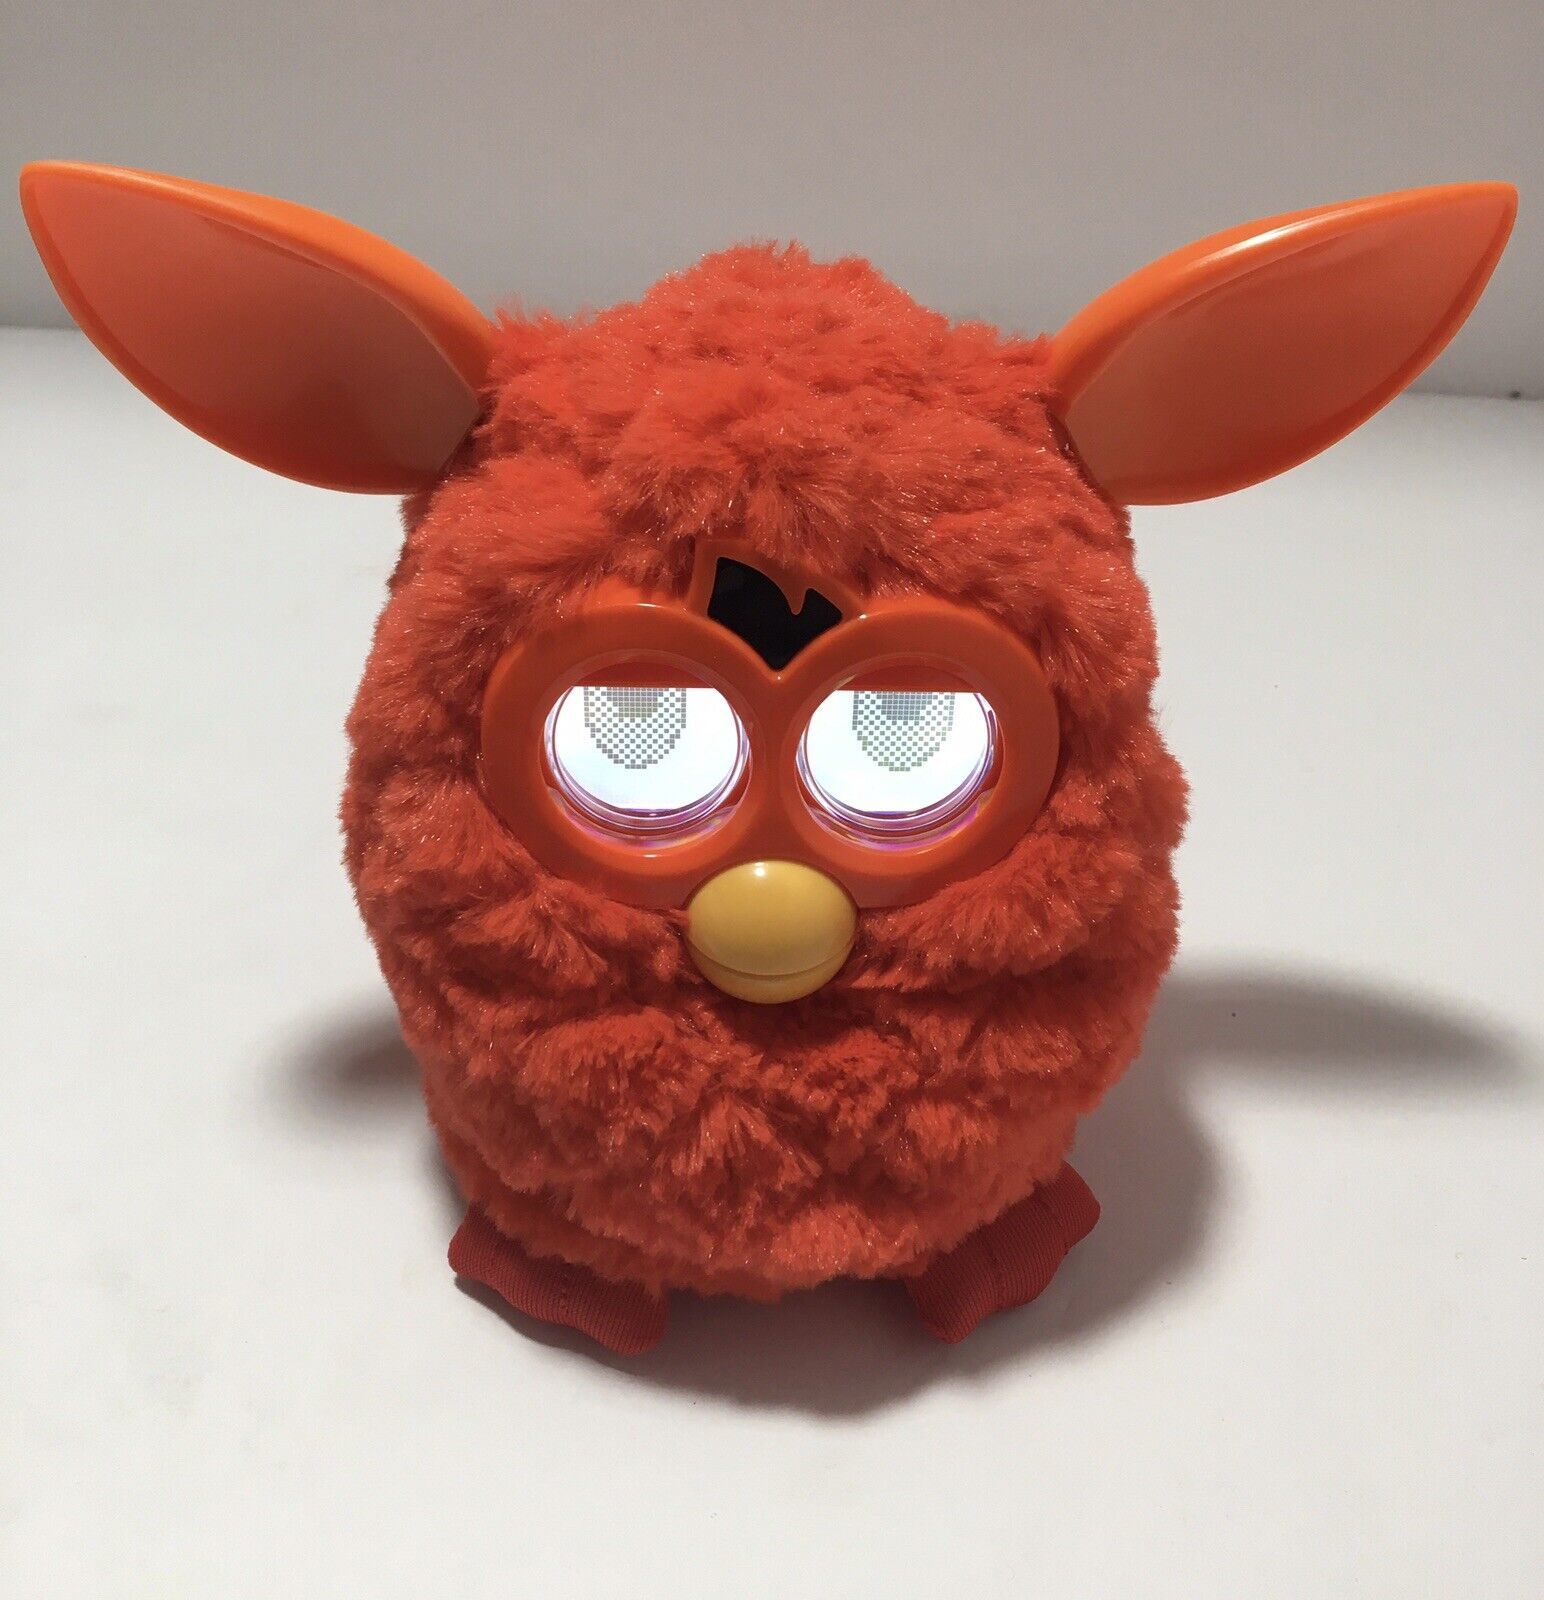 Primary image for Furby Hasbro ‘A Mind Of Its Own’ RARE Orange Interactive Electronic Toy